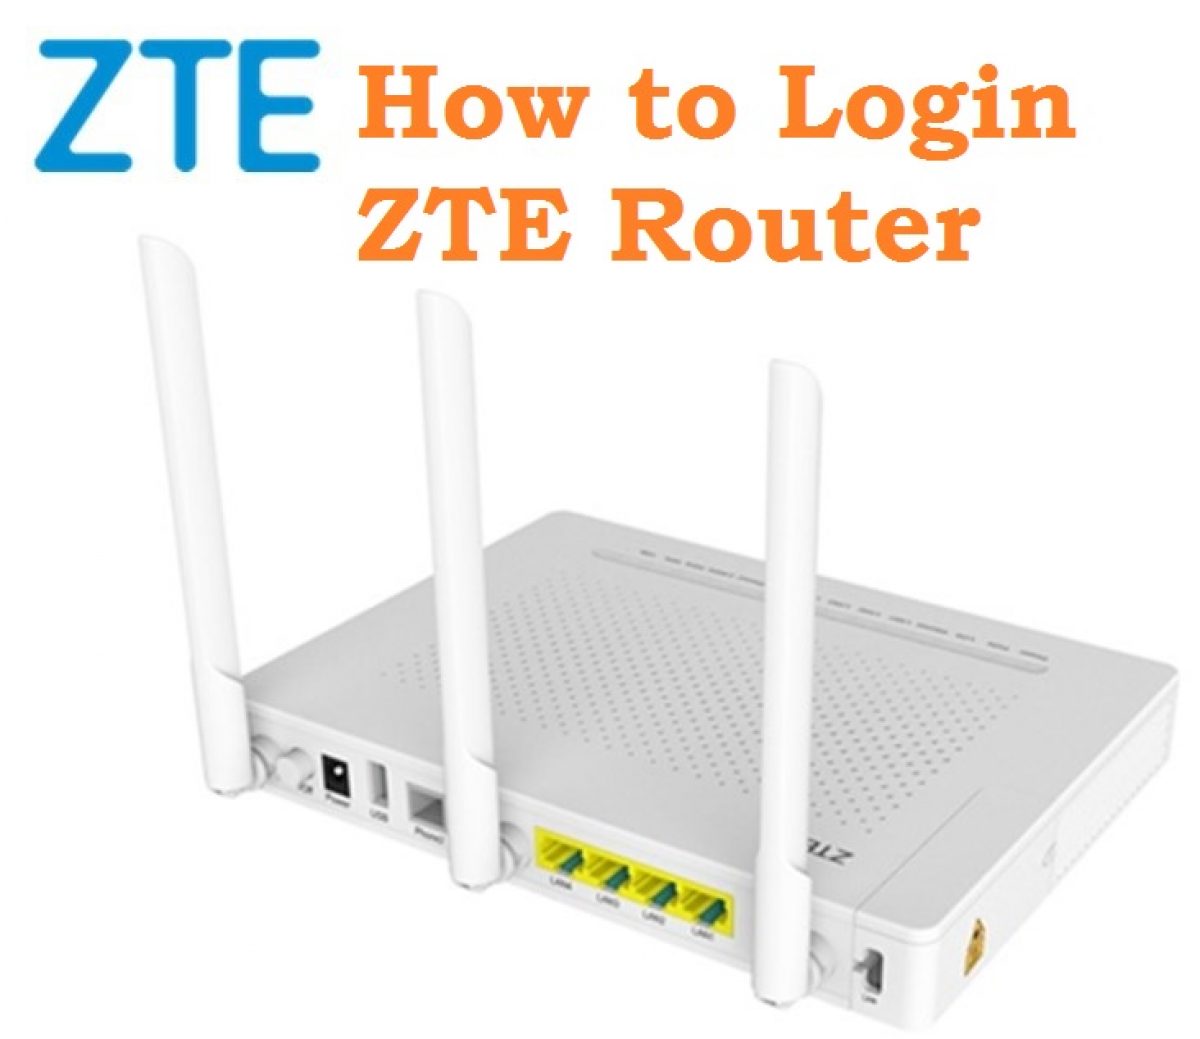 How ZTE Router? 192.168.1.1